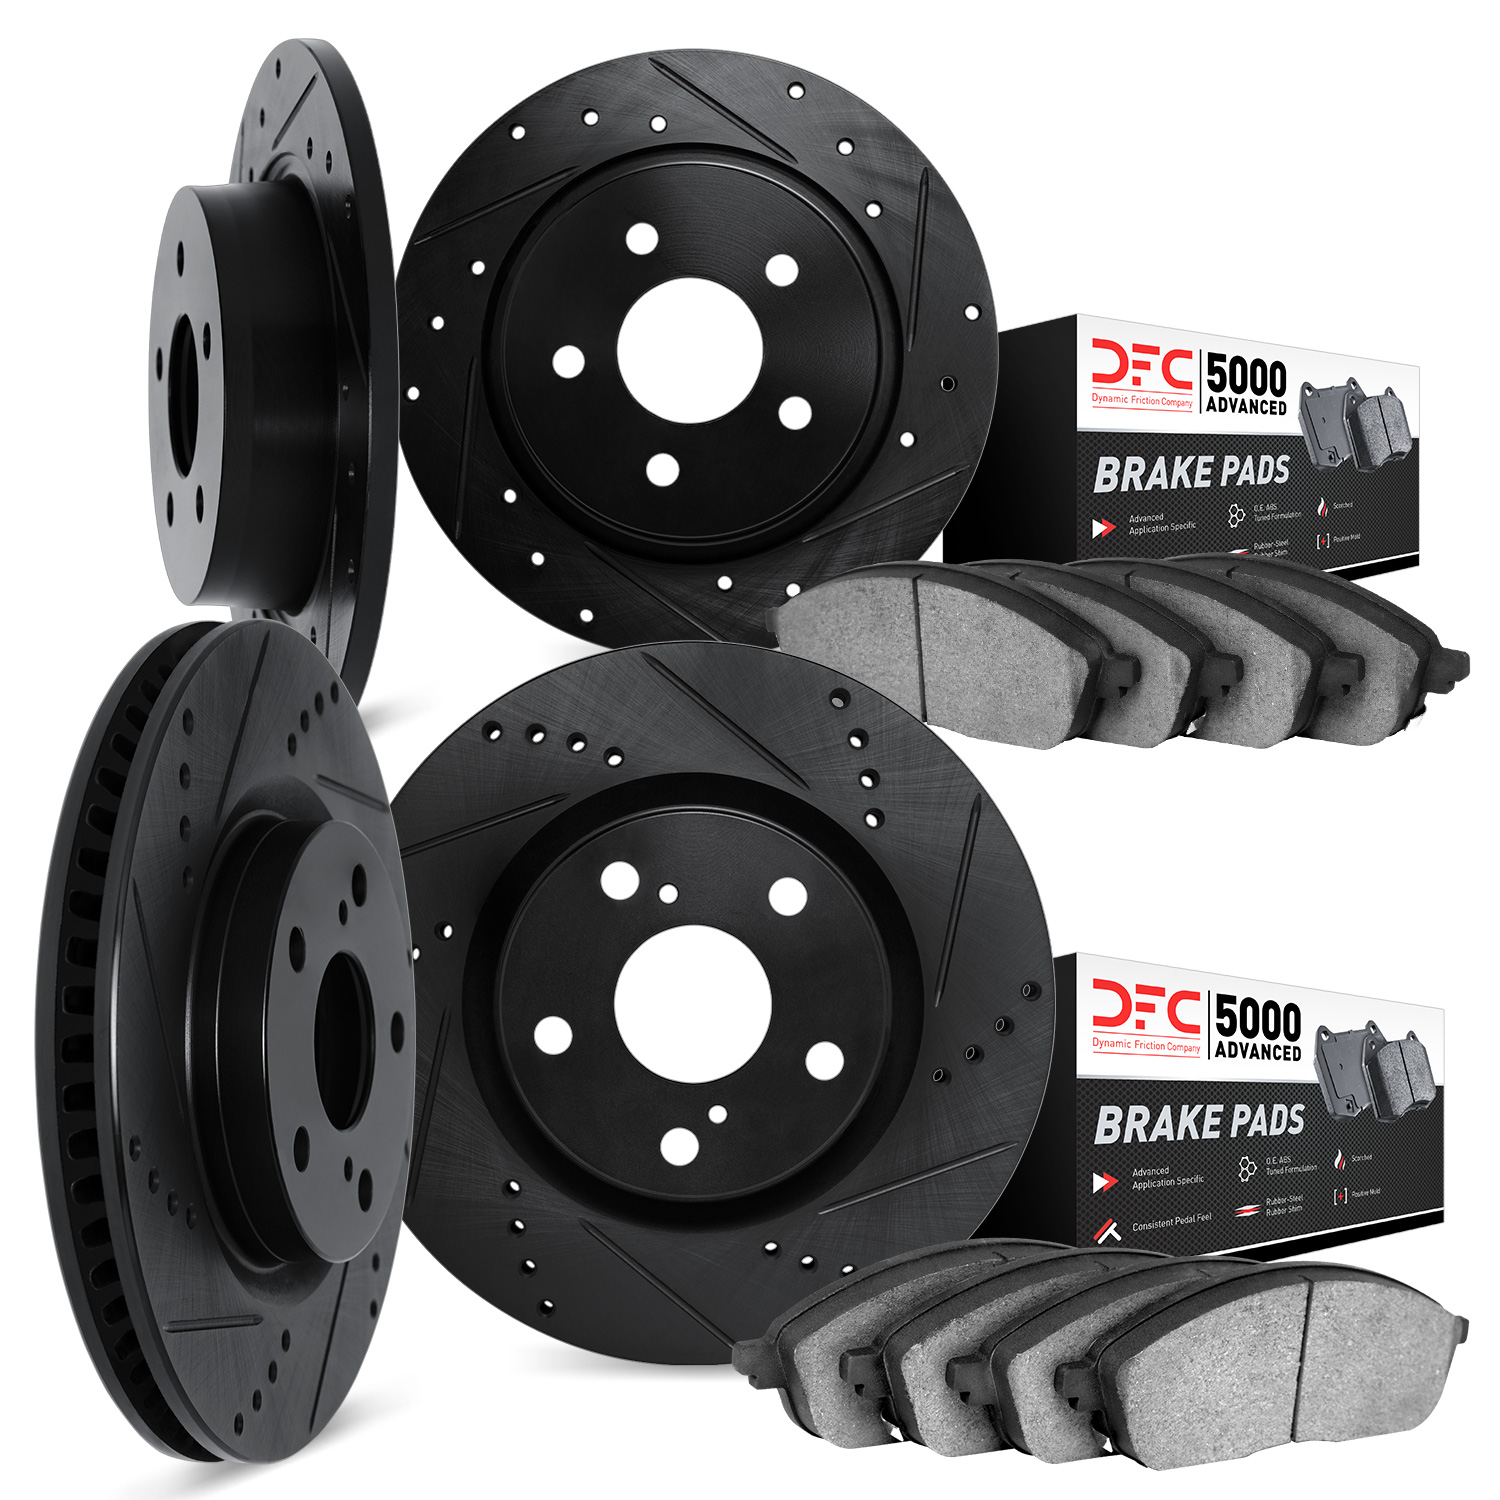 8504-11000 Drilled/Slotted Brake Rotors w/5000 Advanced Brake Pads Kit [Black], 1990-1995 Land Rover, Position: Front and Rear